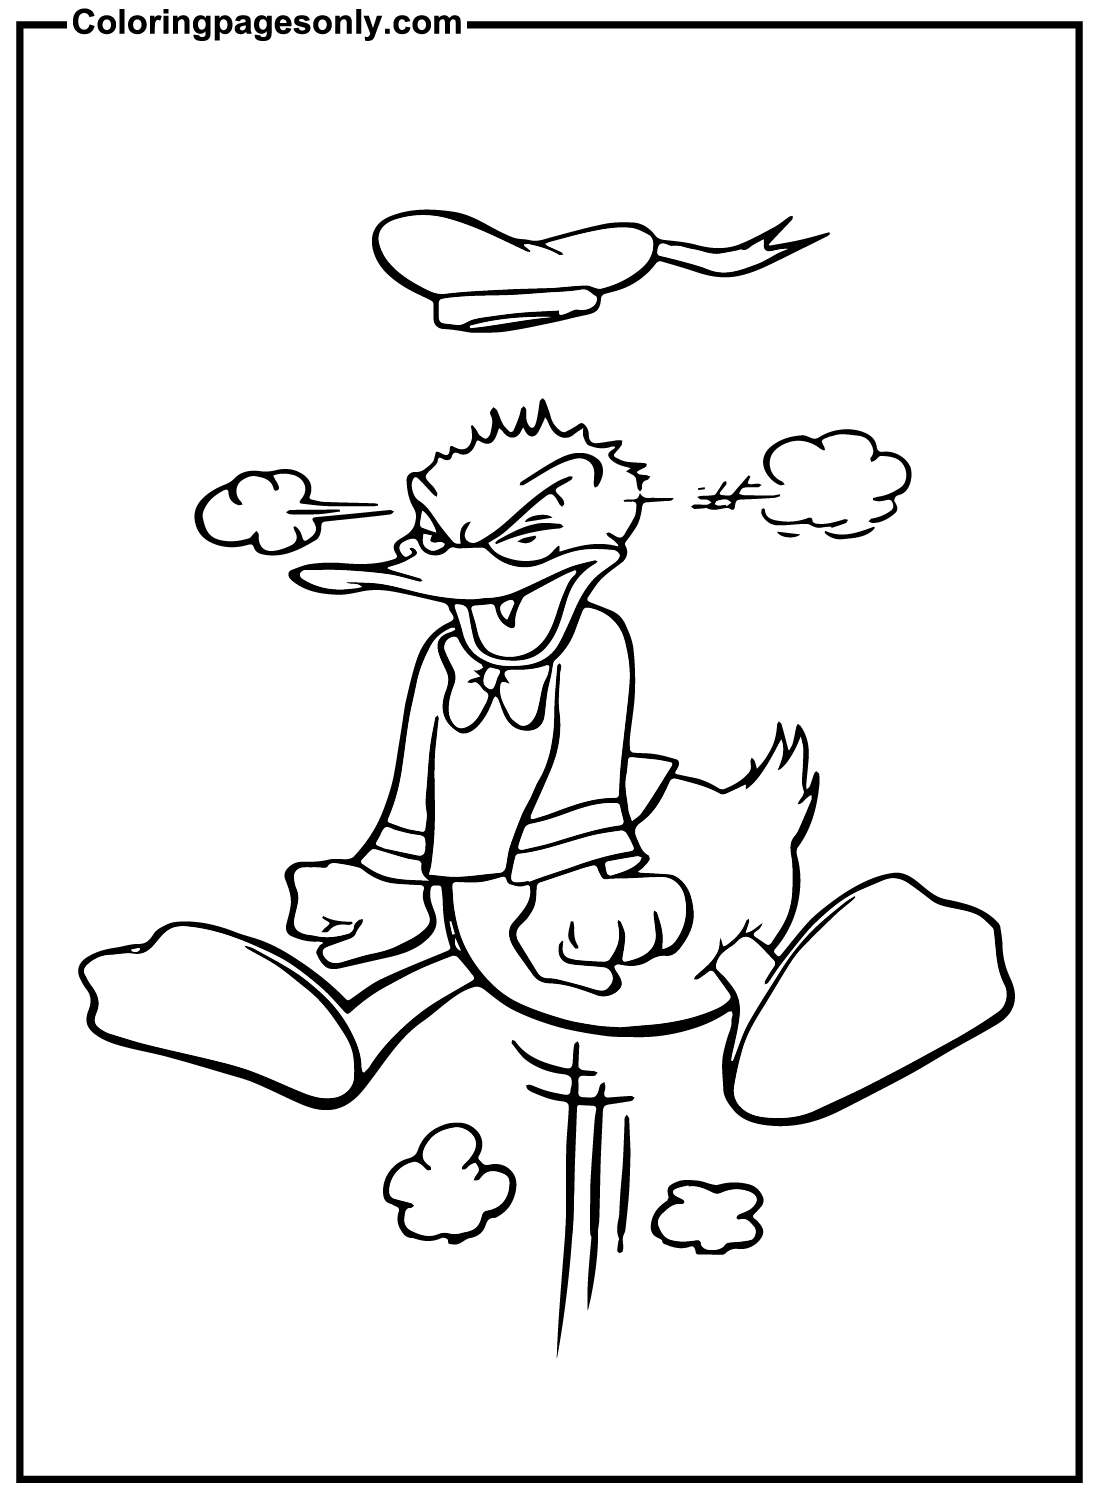 Funny Donald Duck Kingdom Hearts Coloring Pages